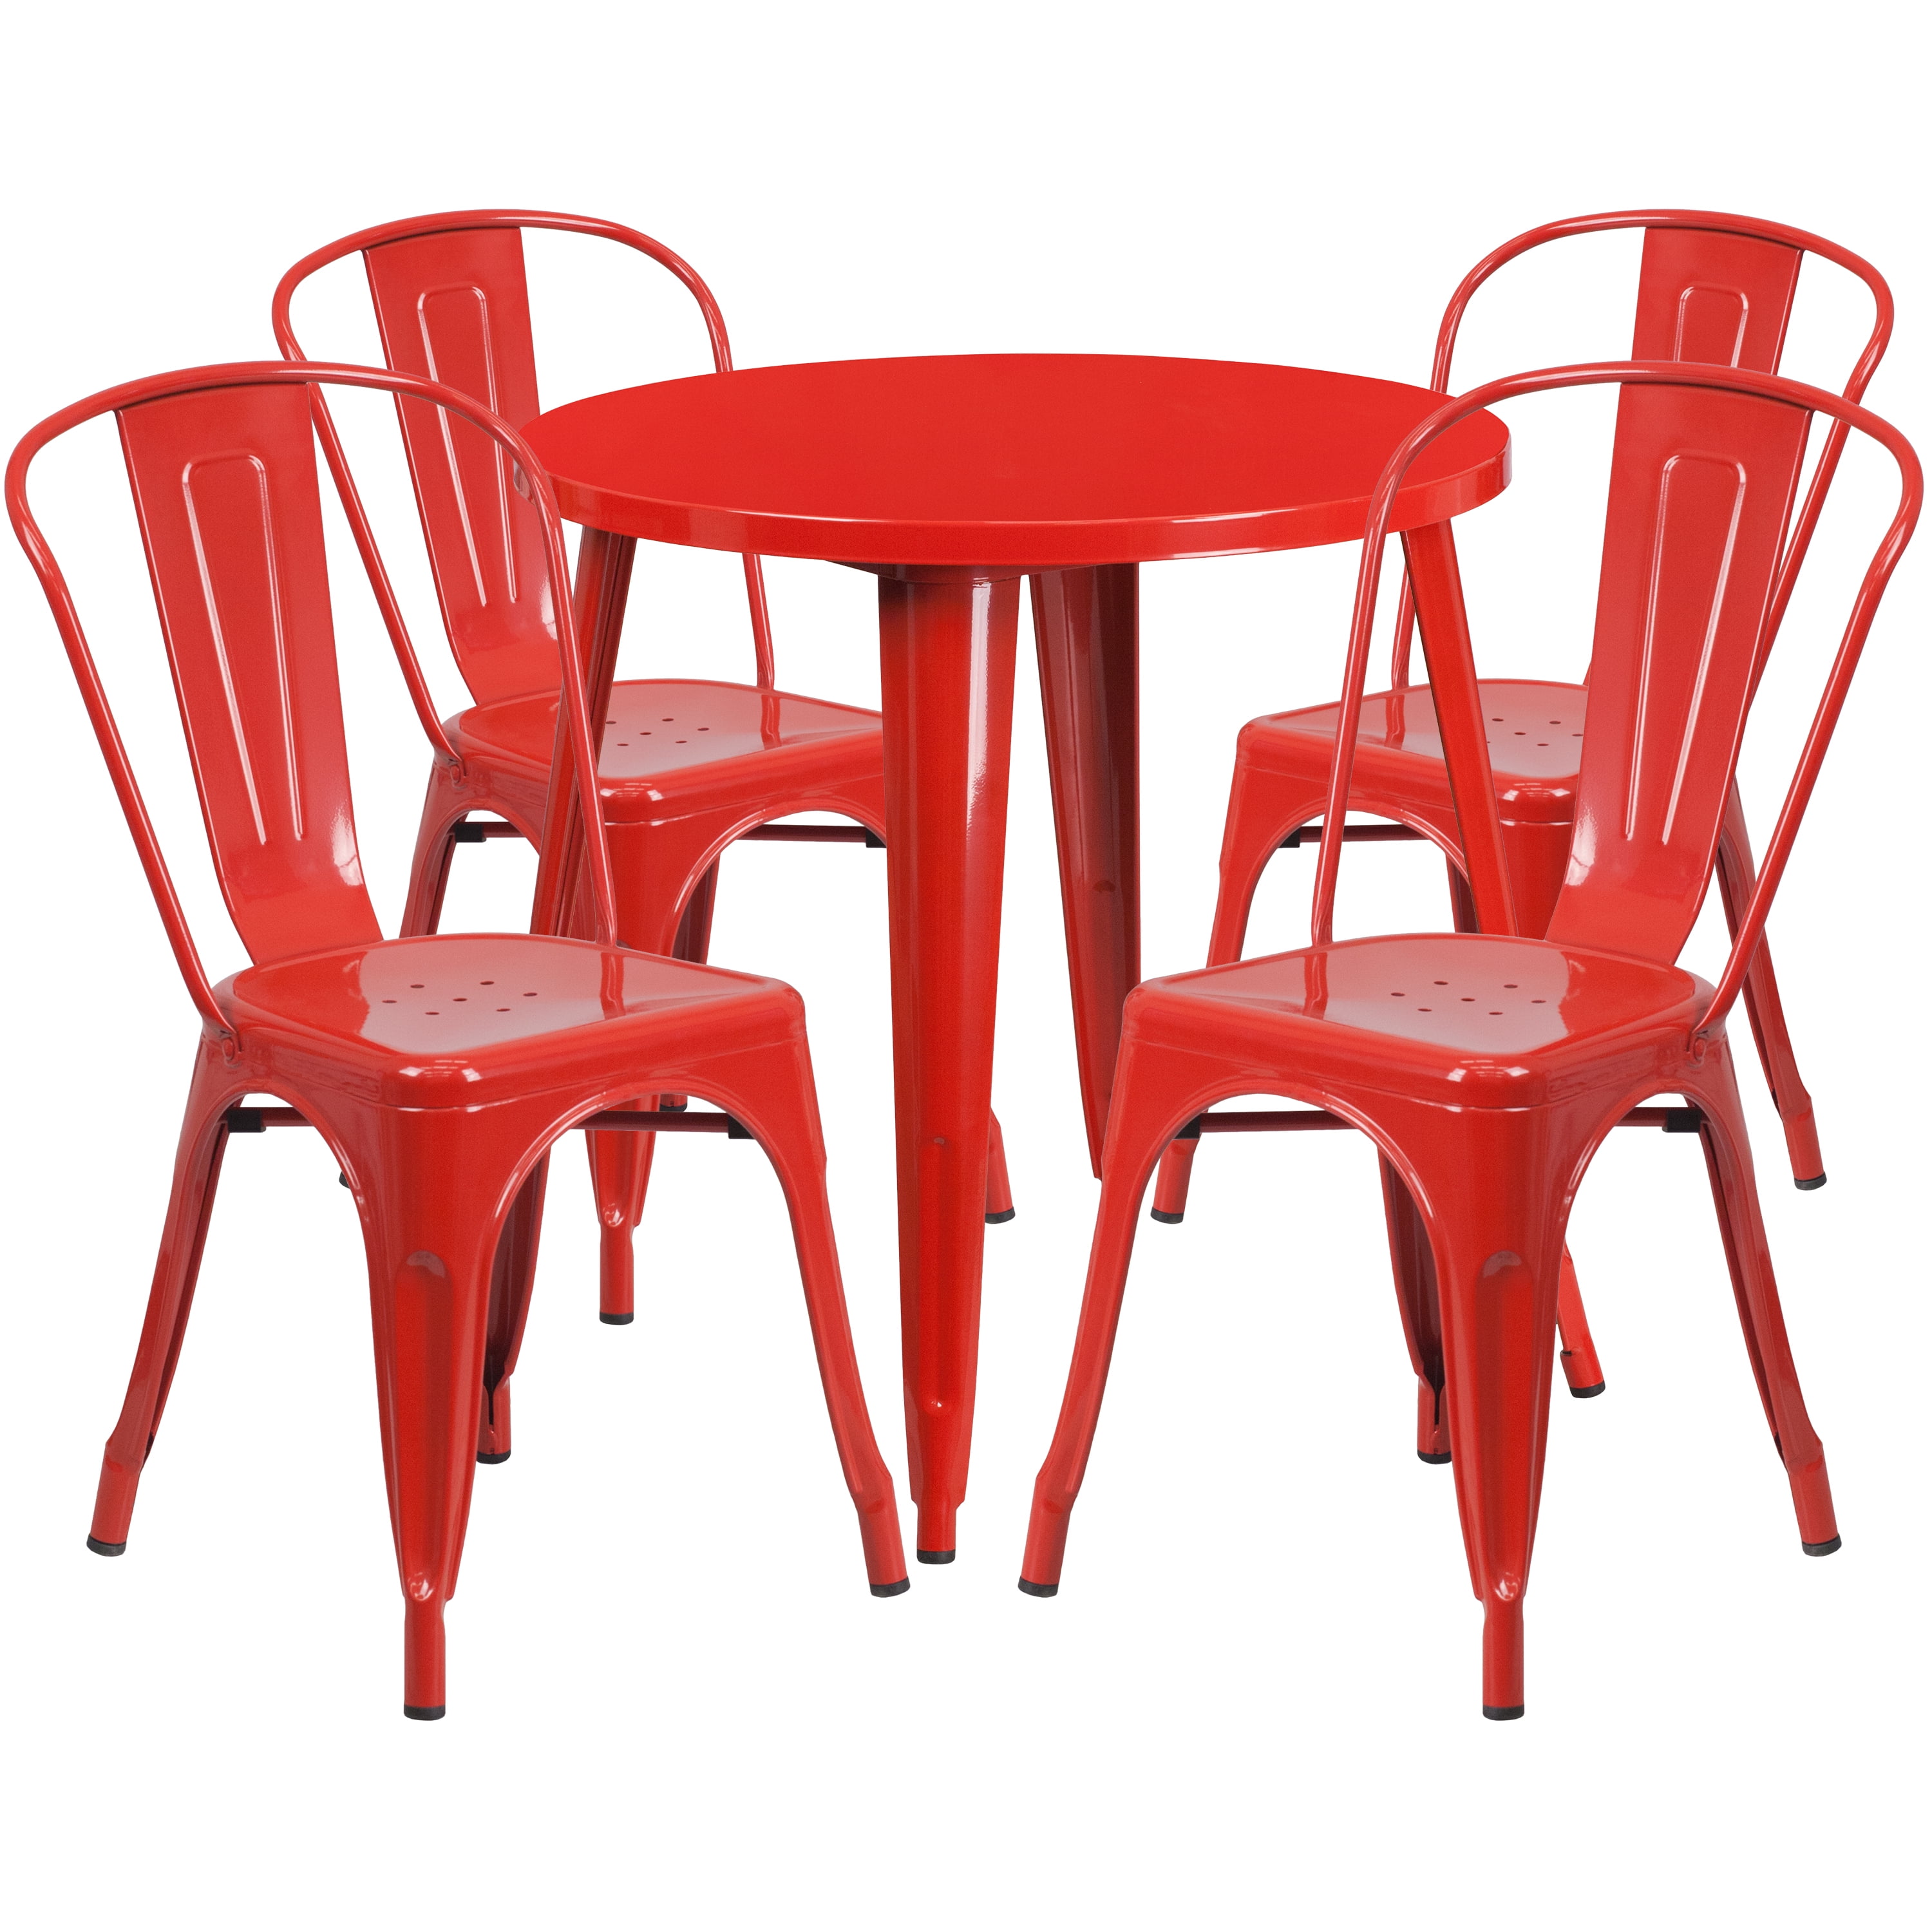 Flash Furniture Commercial Grade 30" Round Red Metal Indoor-Outdoor Table Set with 4 Cafe Chairs - image 2 of 5